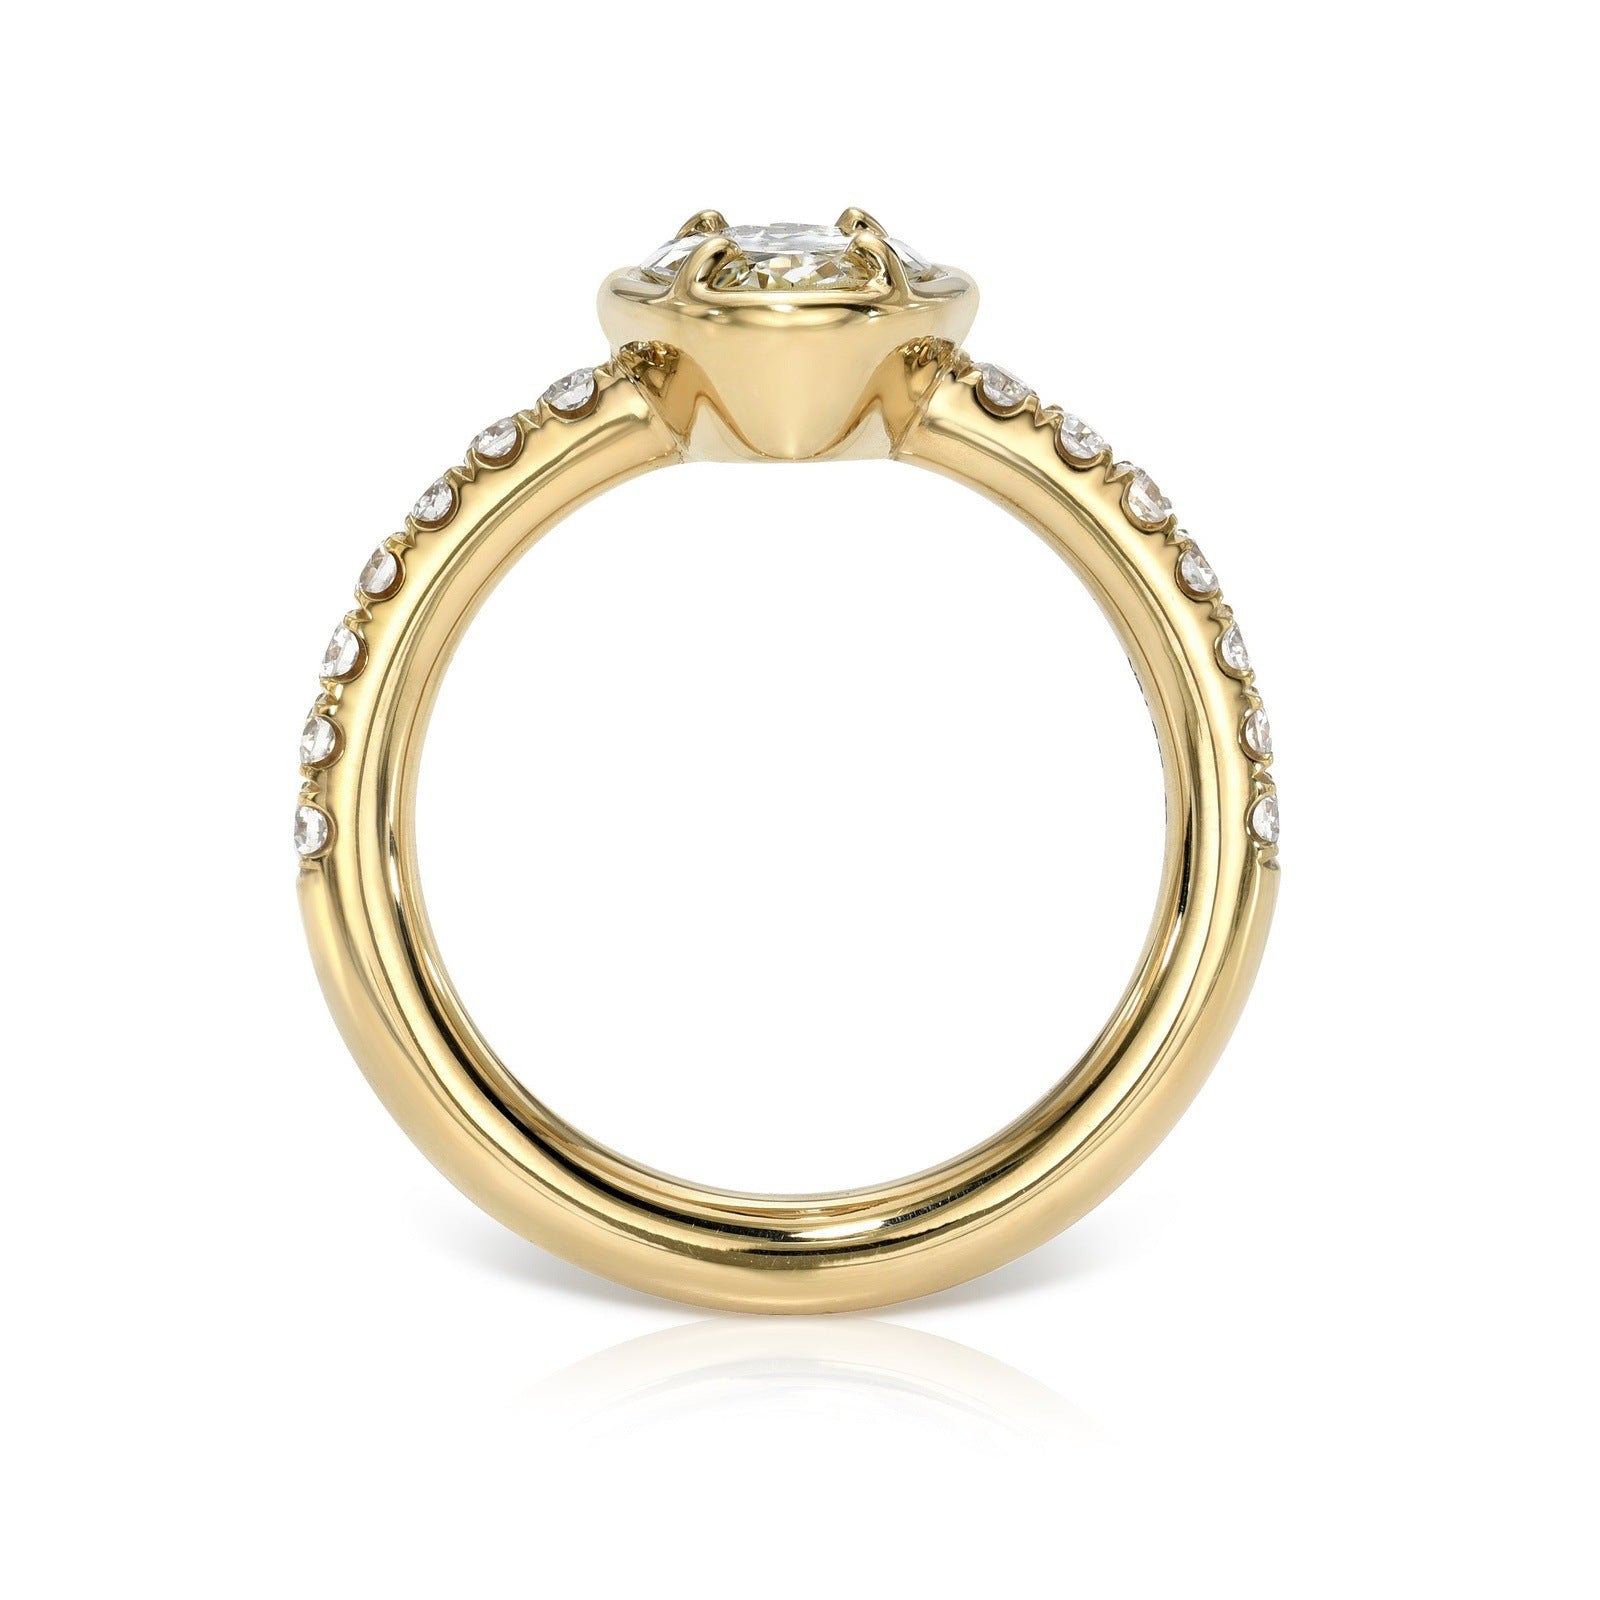 SINGLE STONE ELLA RING featuring 1.39ct L/VS2 GIA certified moval cut diamond with 0.35ctw old European cut accent diamonds prong set in a handcrafted 18K yellow gold mounting.